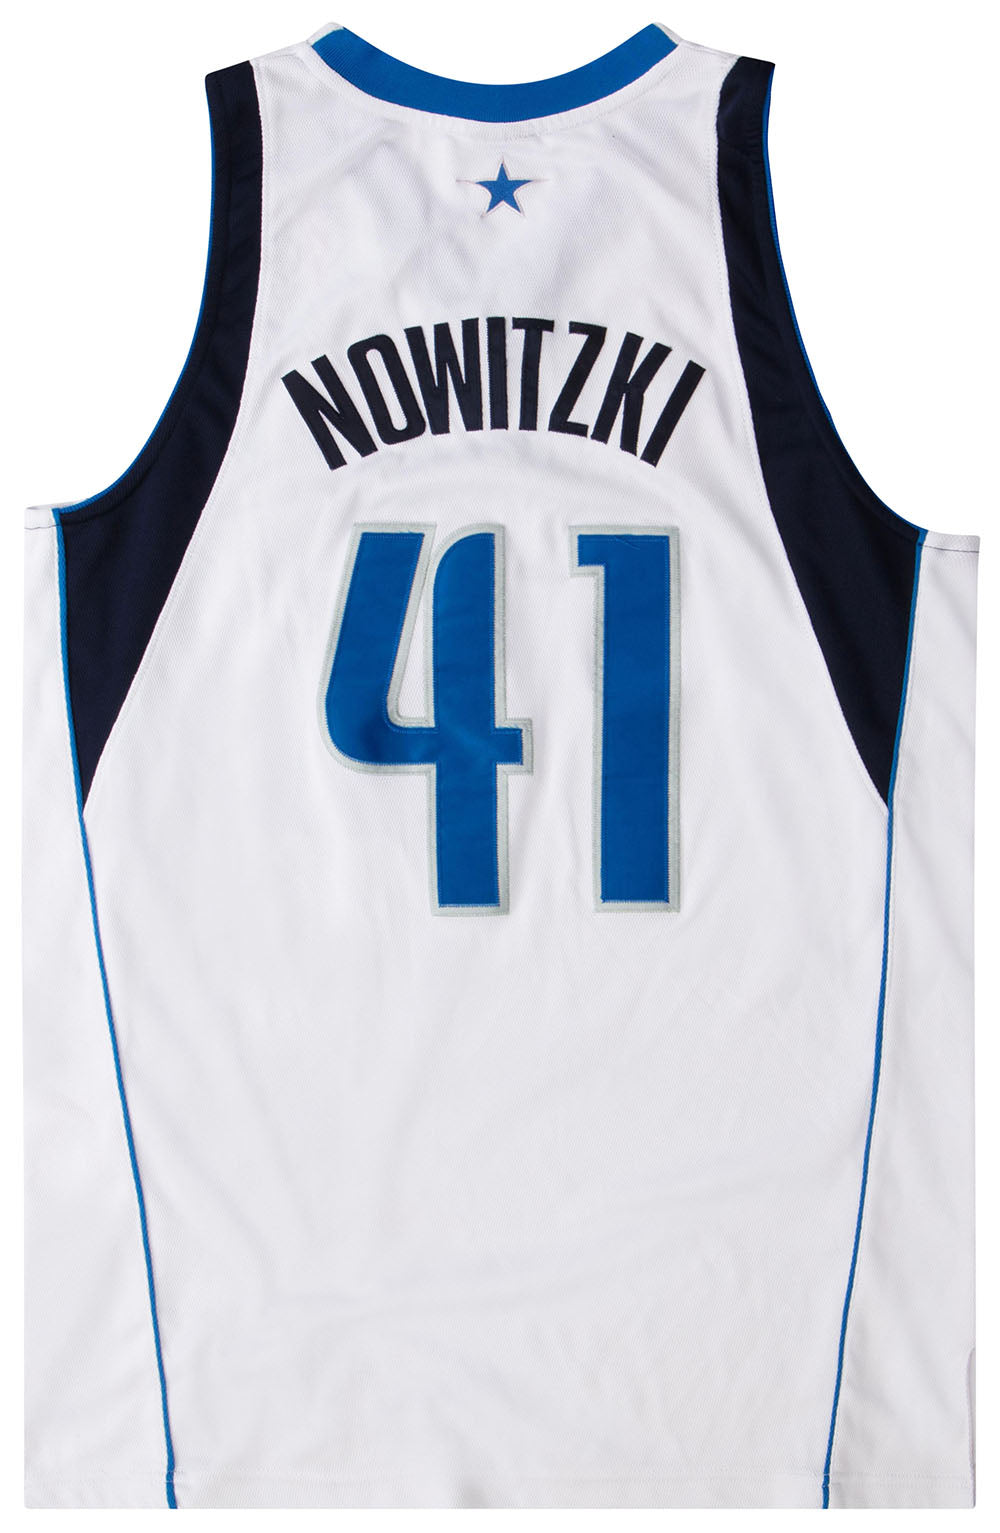 Authentic Nike Dirk Nowitzki 2004 All Star Game Jersey. Mens Large.